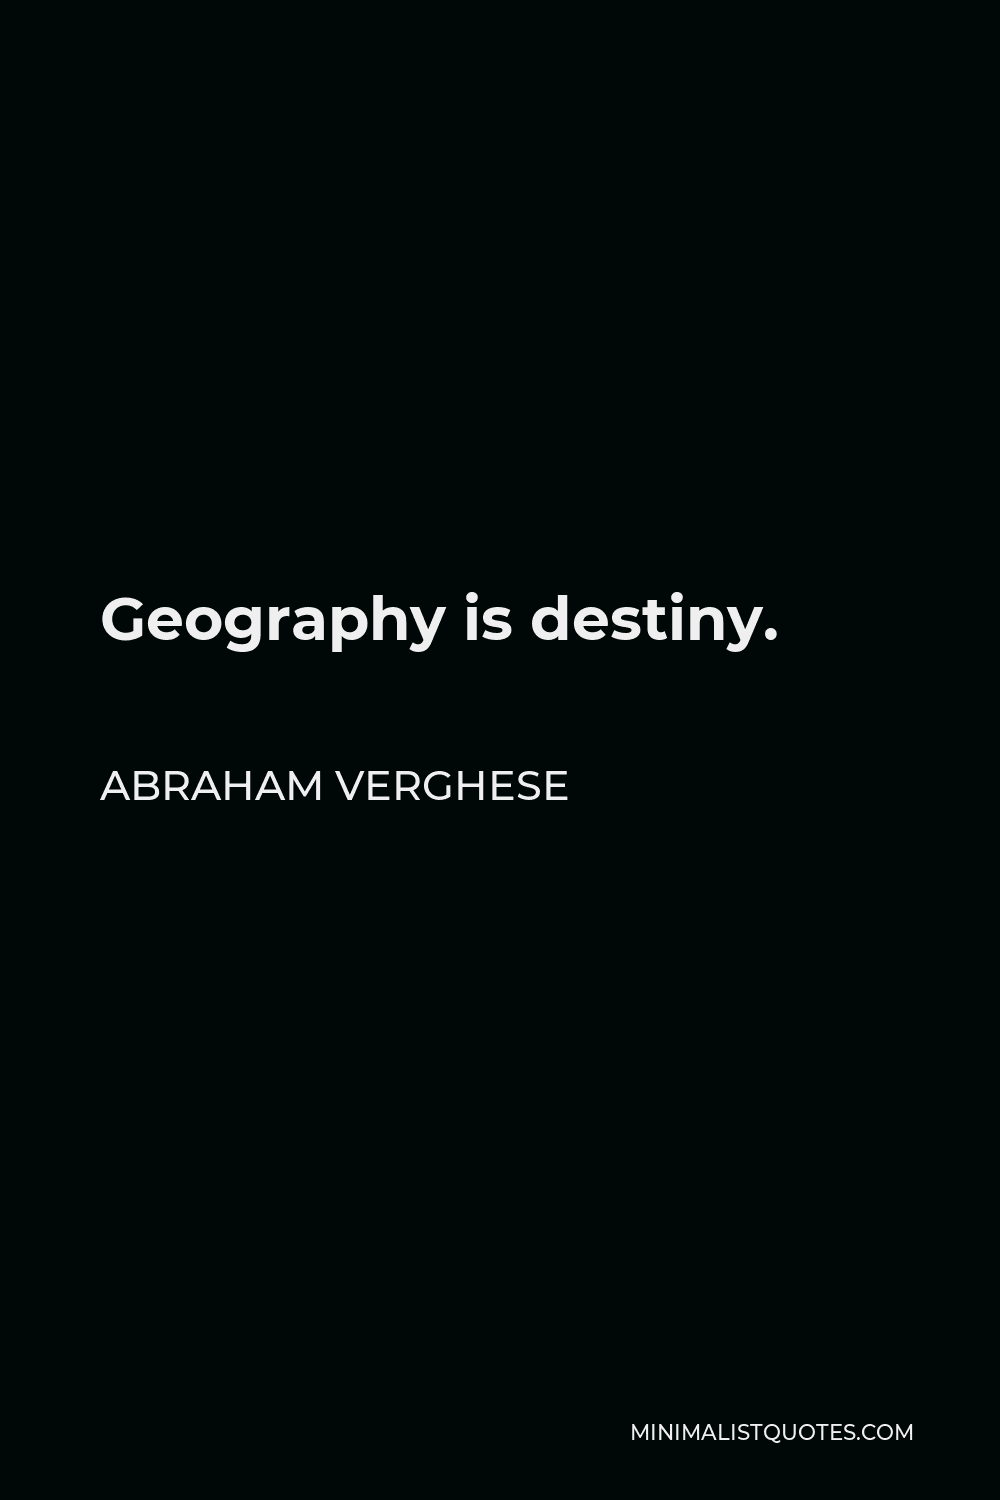 Abraham Verghese Quote - Geography is destiny.